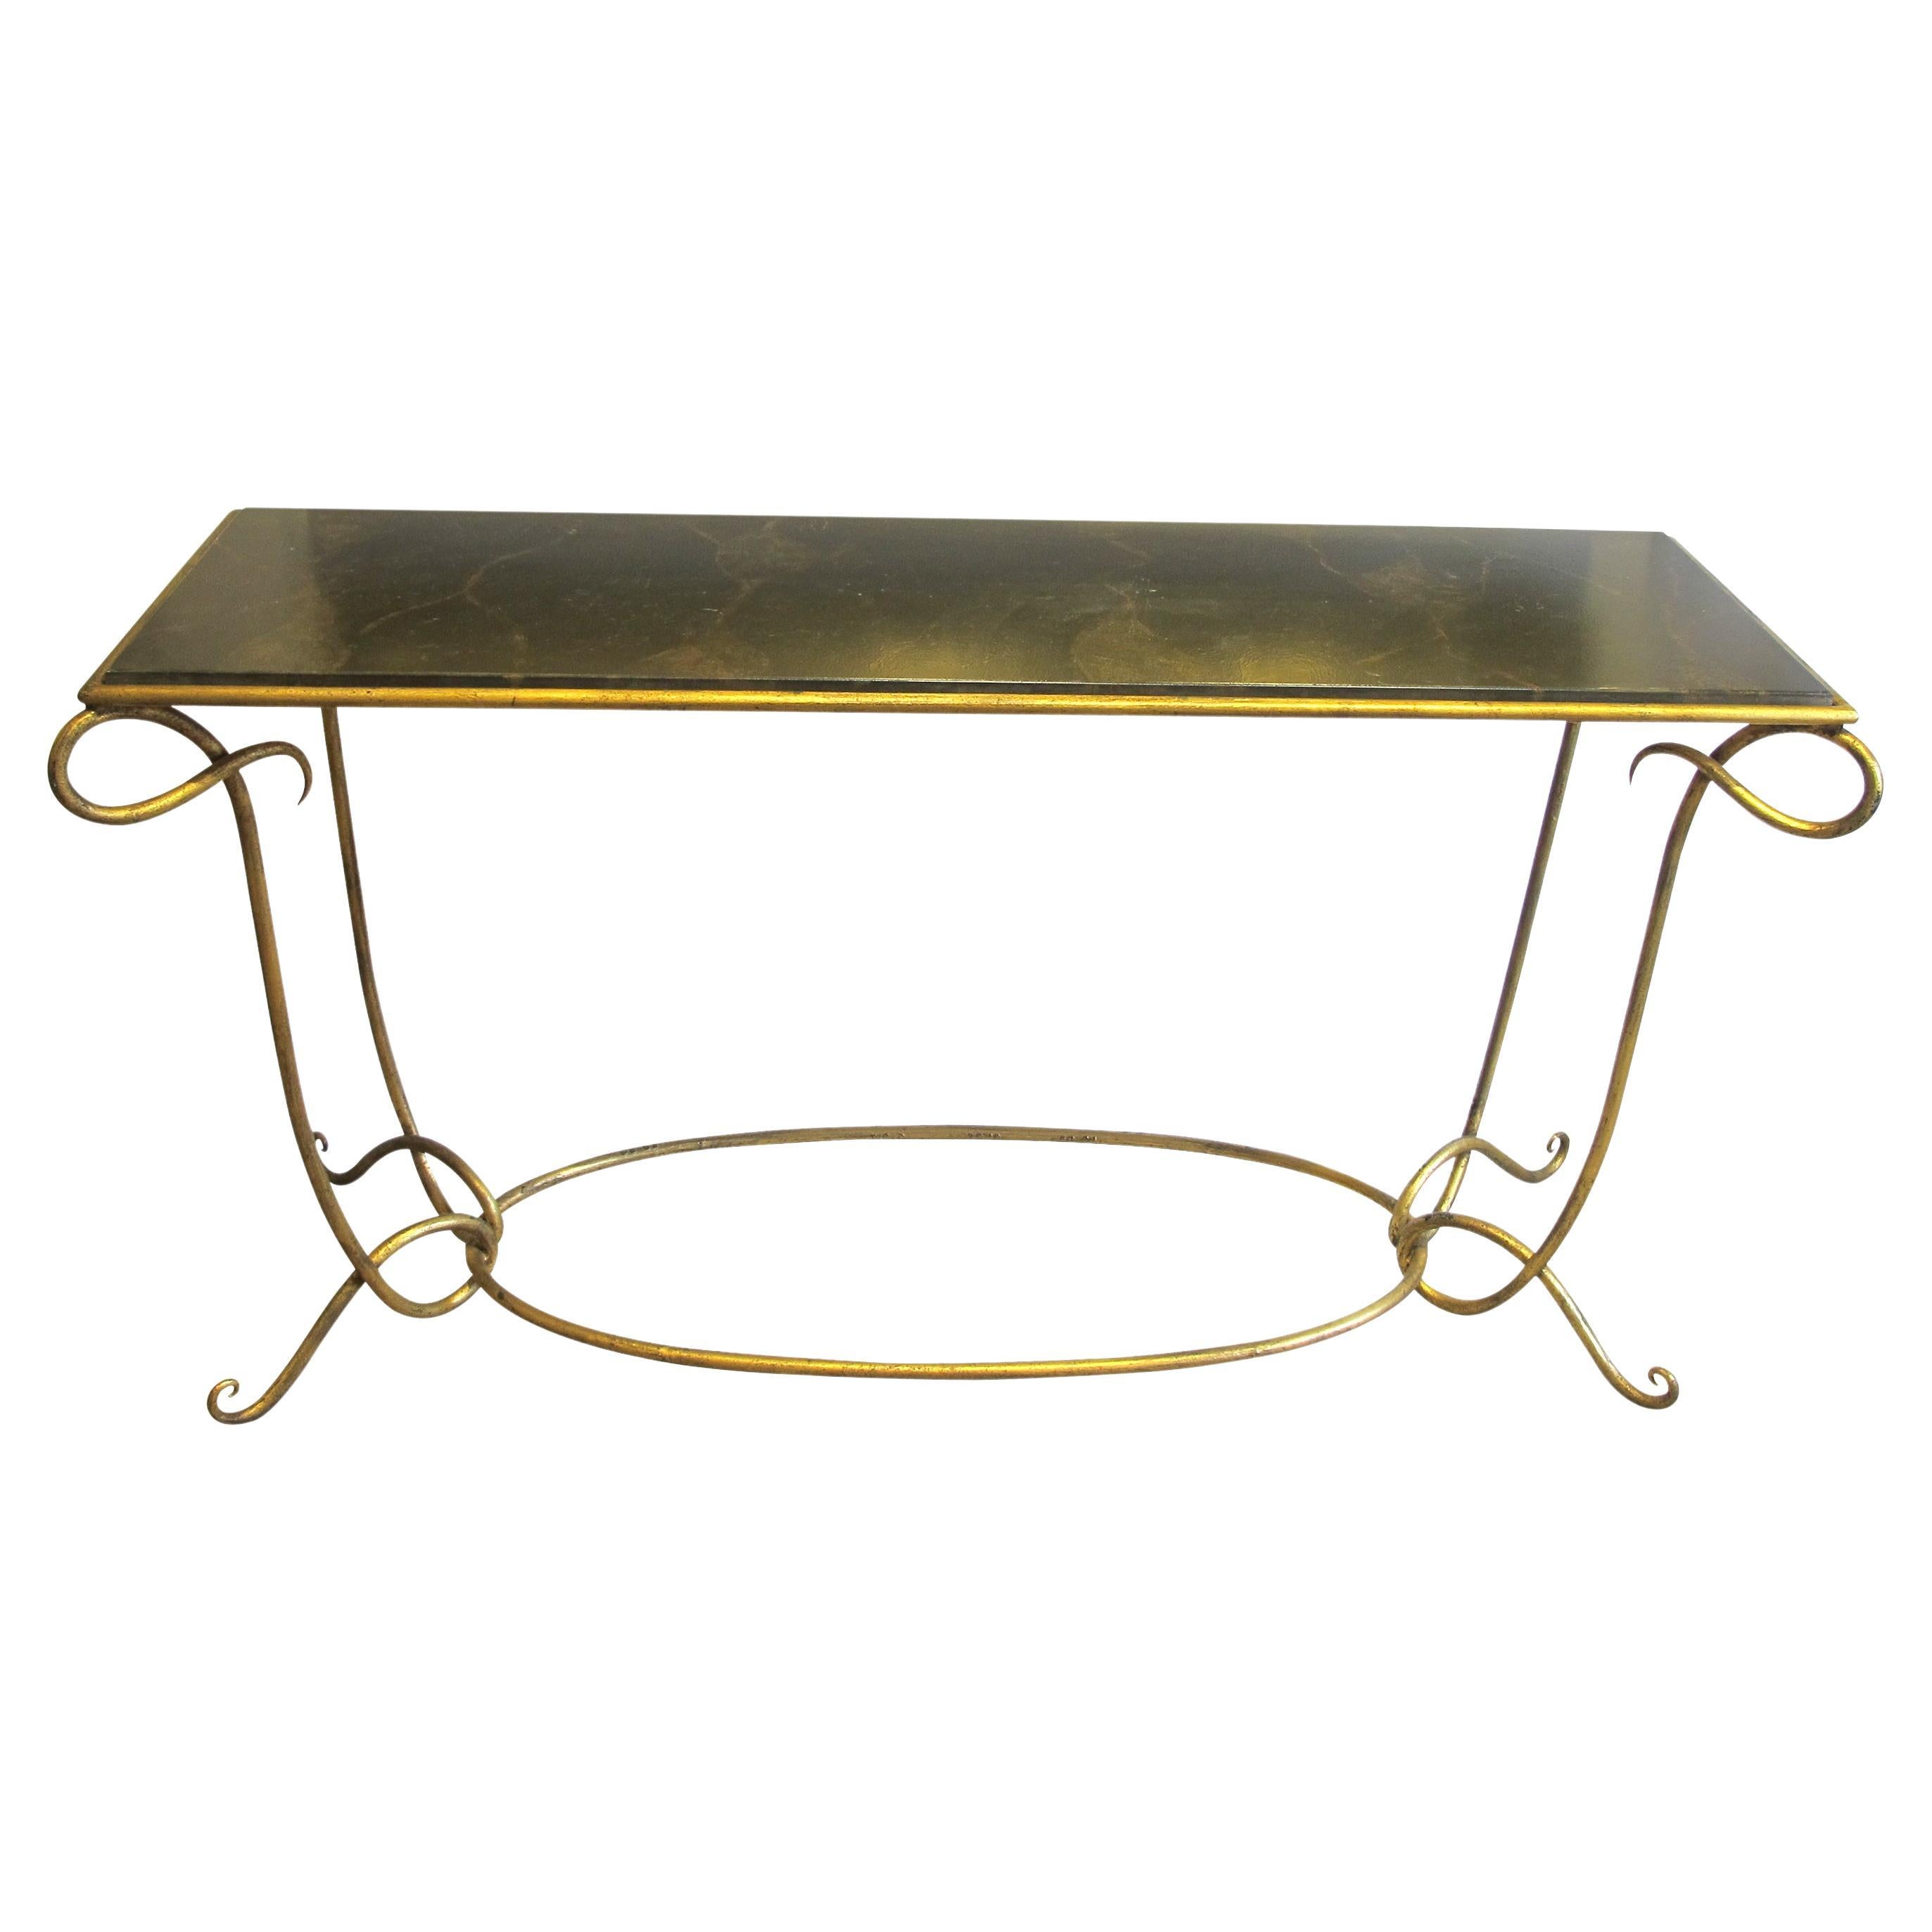 1950s Large French Console Table with a Gilt Iron Frame - style of René Drouet